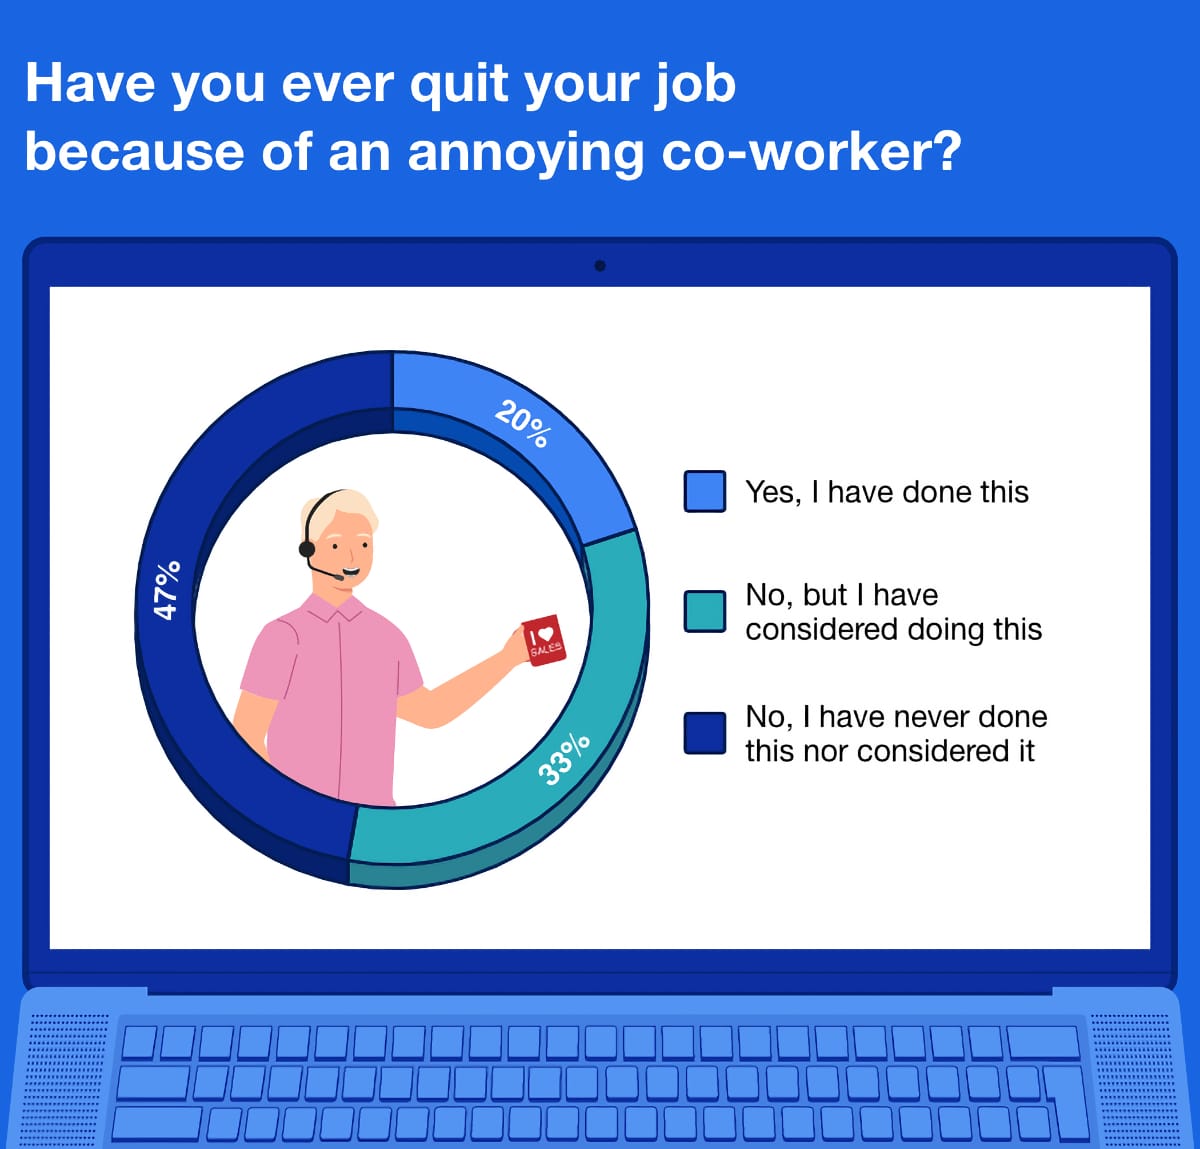 Infographic: Have you ever quit your job because of an annoying co-worker